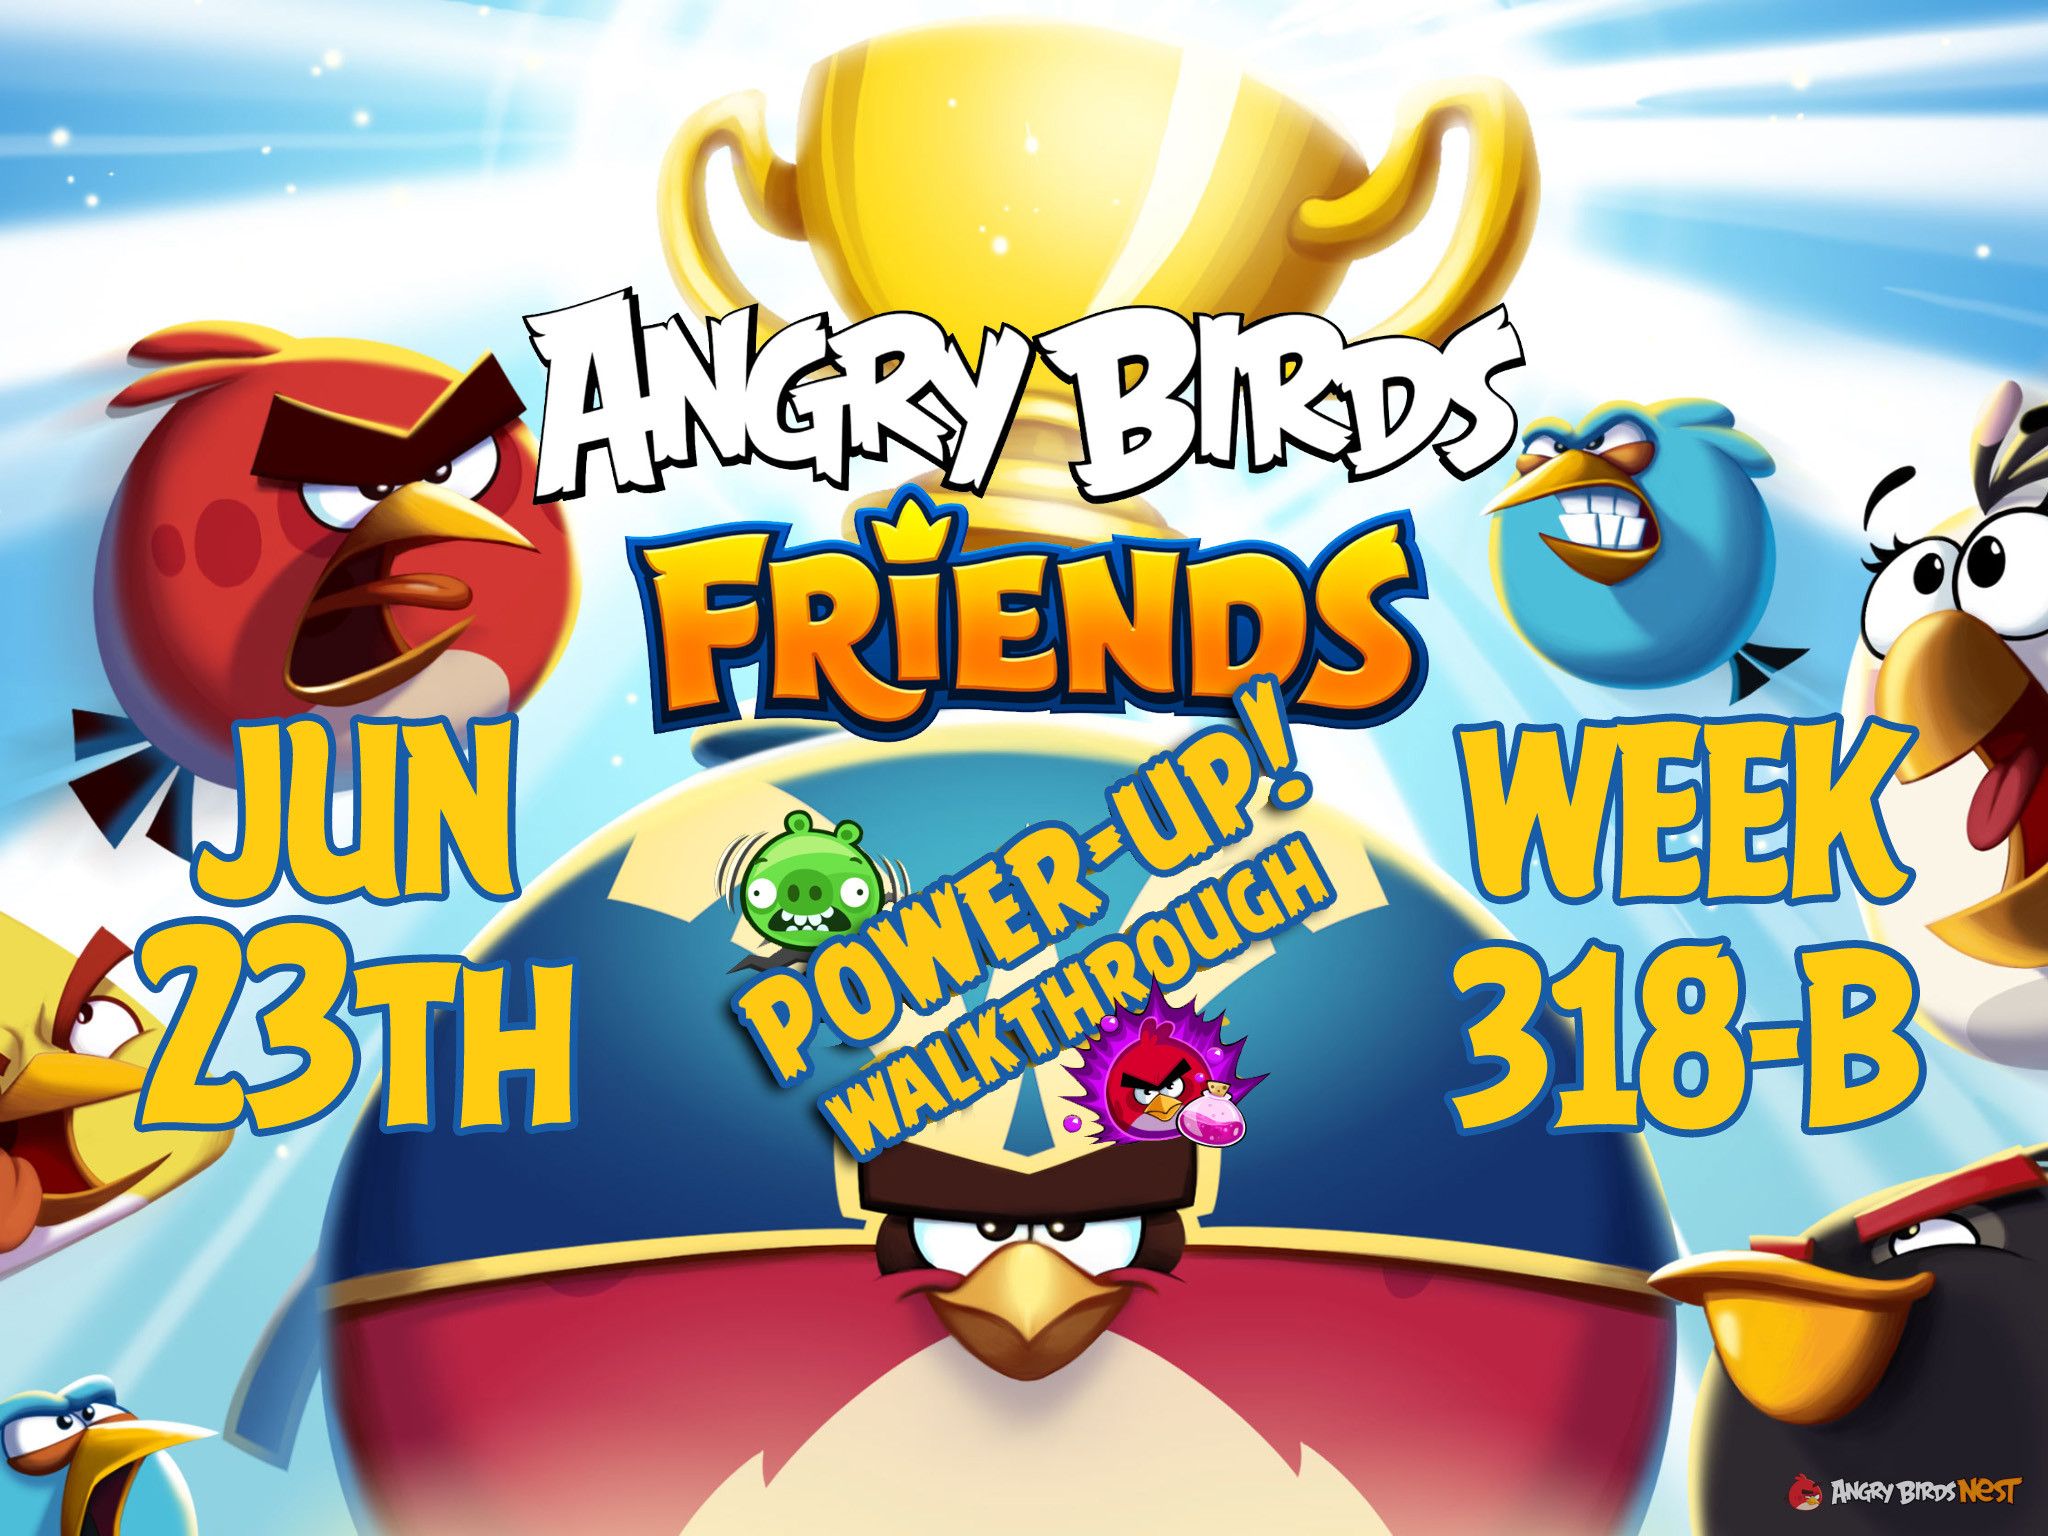 Angry-Birds-Friends-Tournament-Week-318-B-Feature-Image-PU